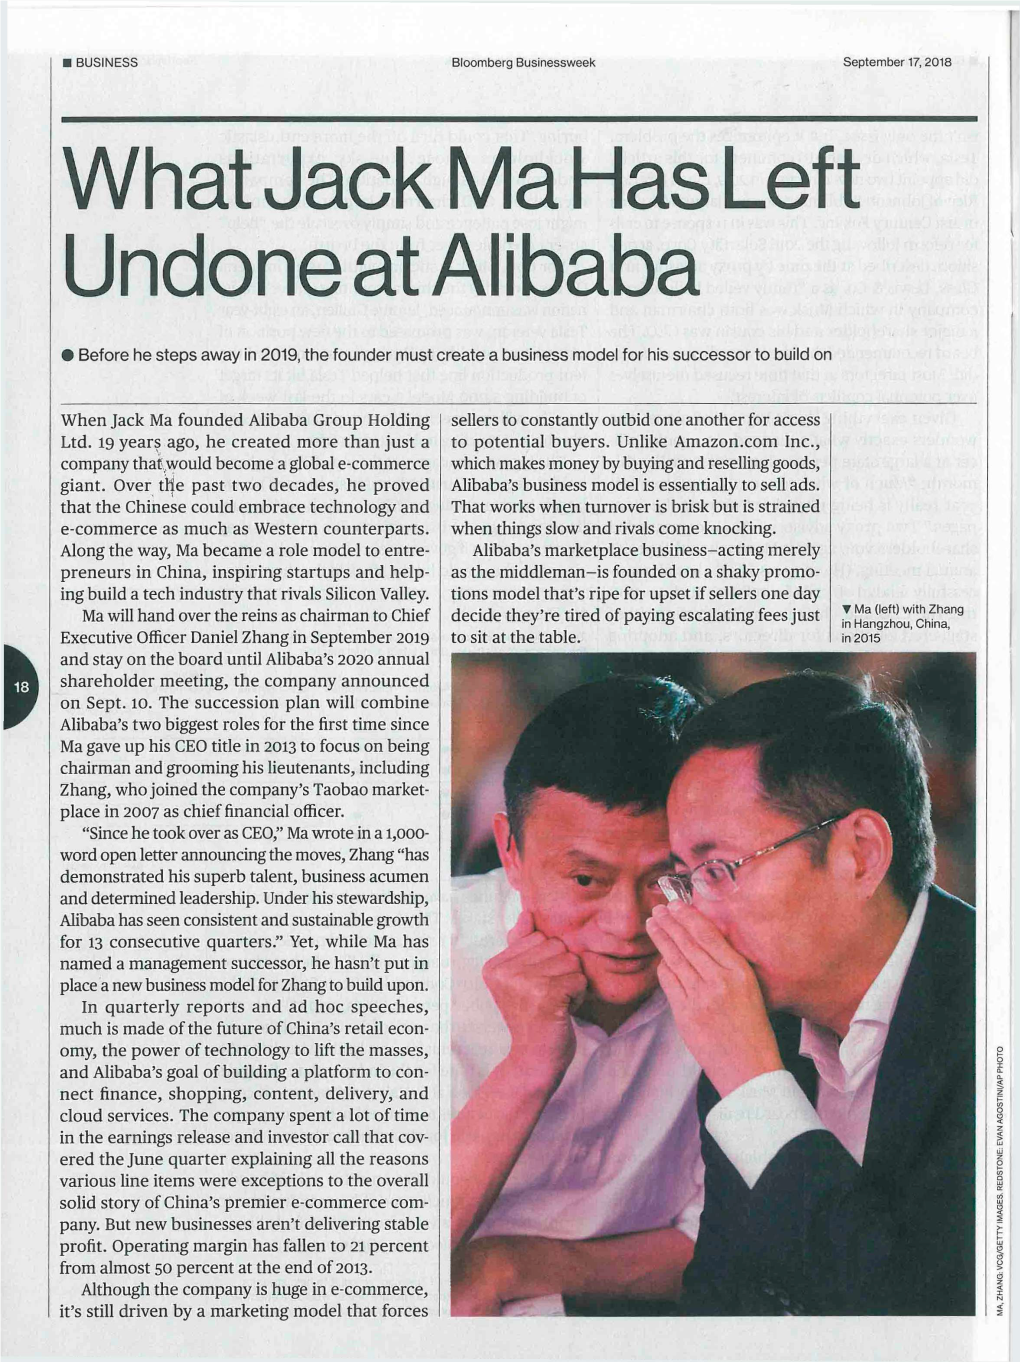 What Jack Ma Has Left Undone at Alibaba